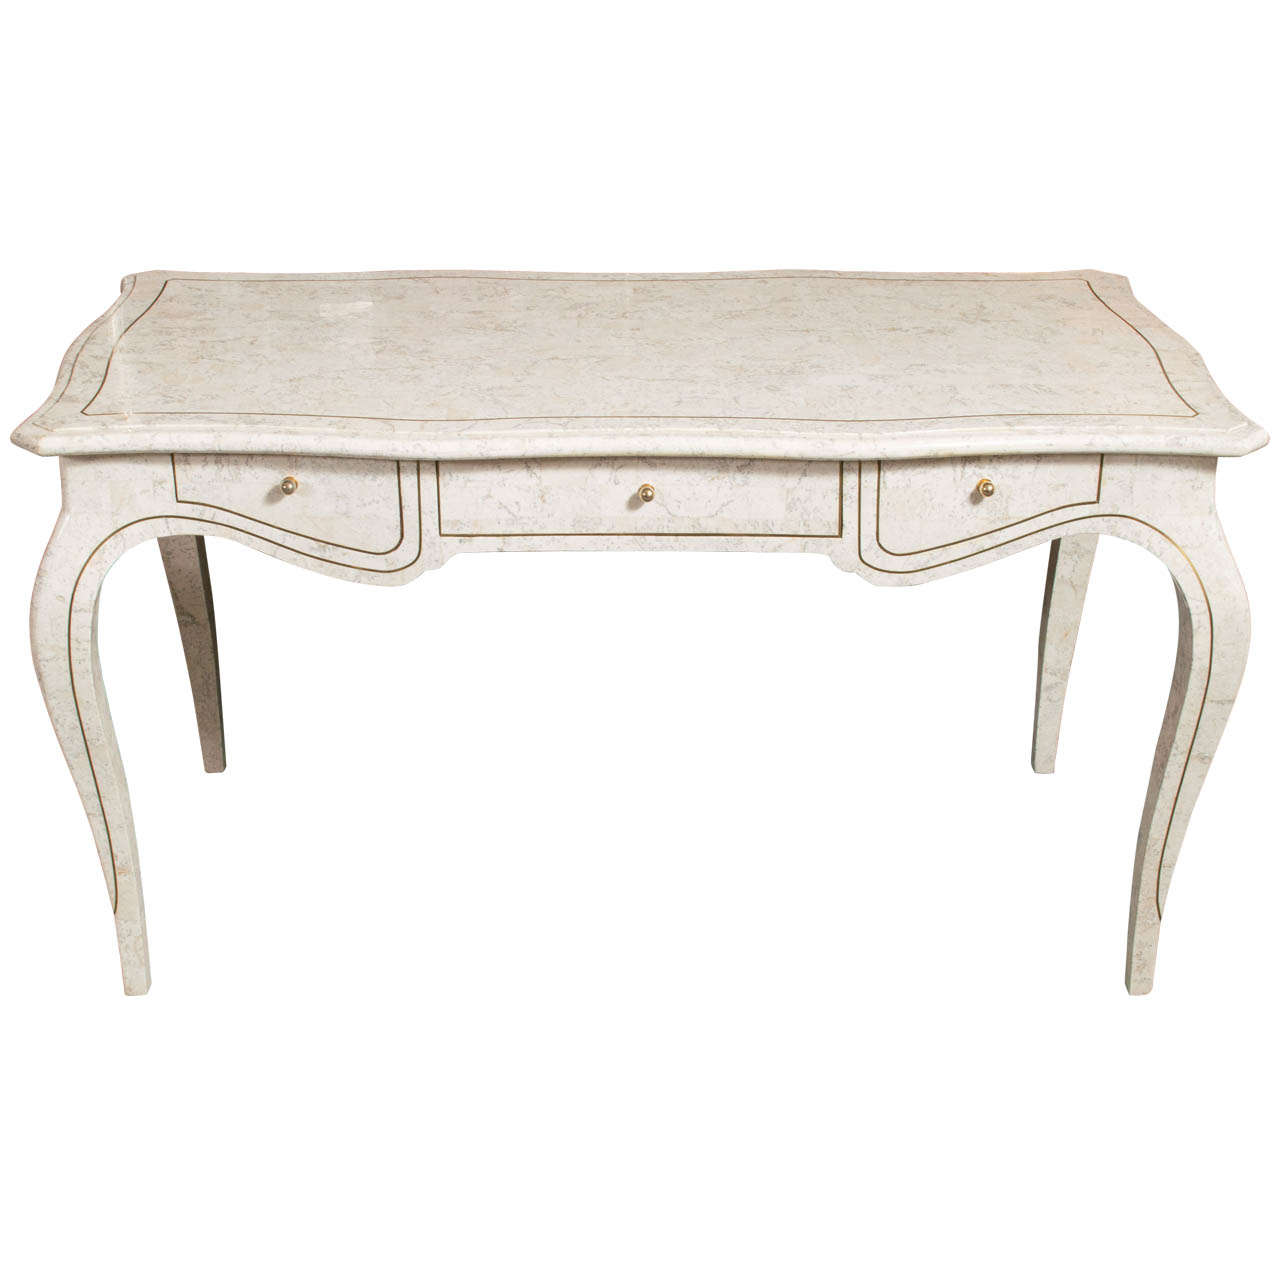 French Style Bureau Plat In Tesselated Stone by Maitland Smith